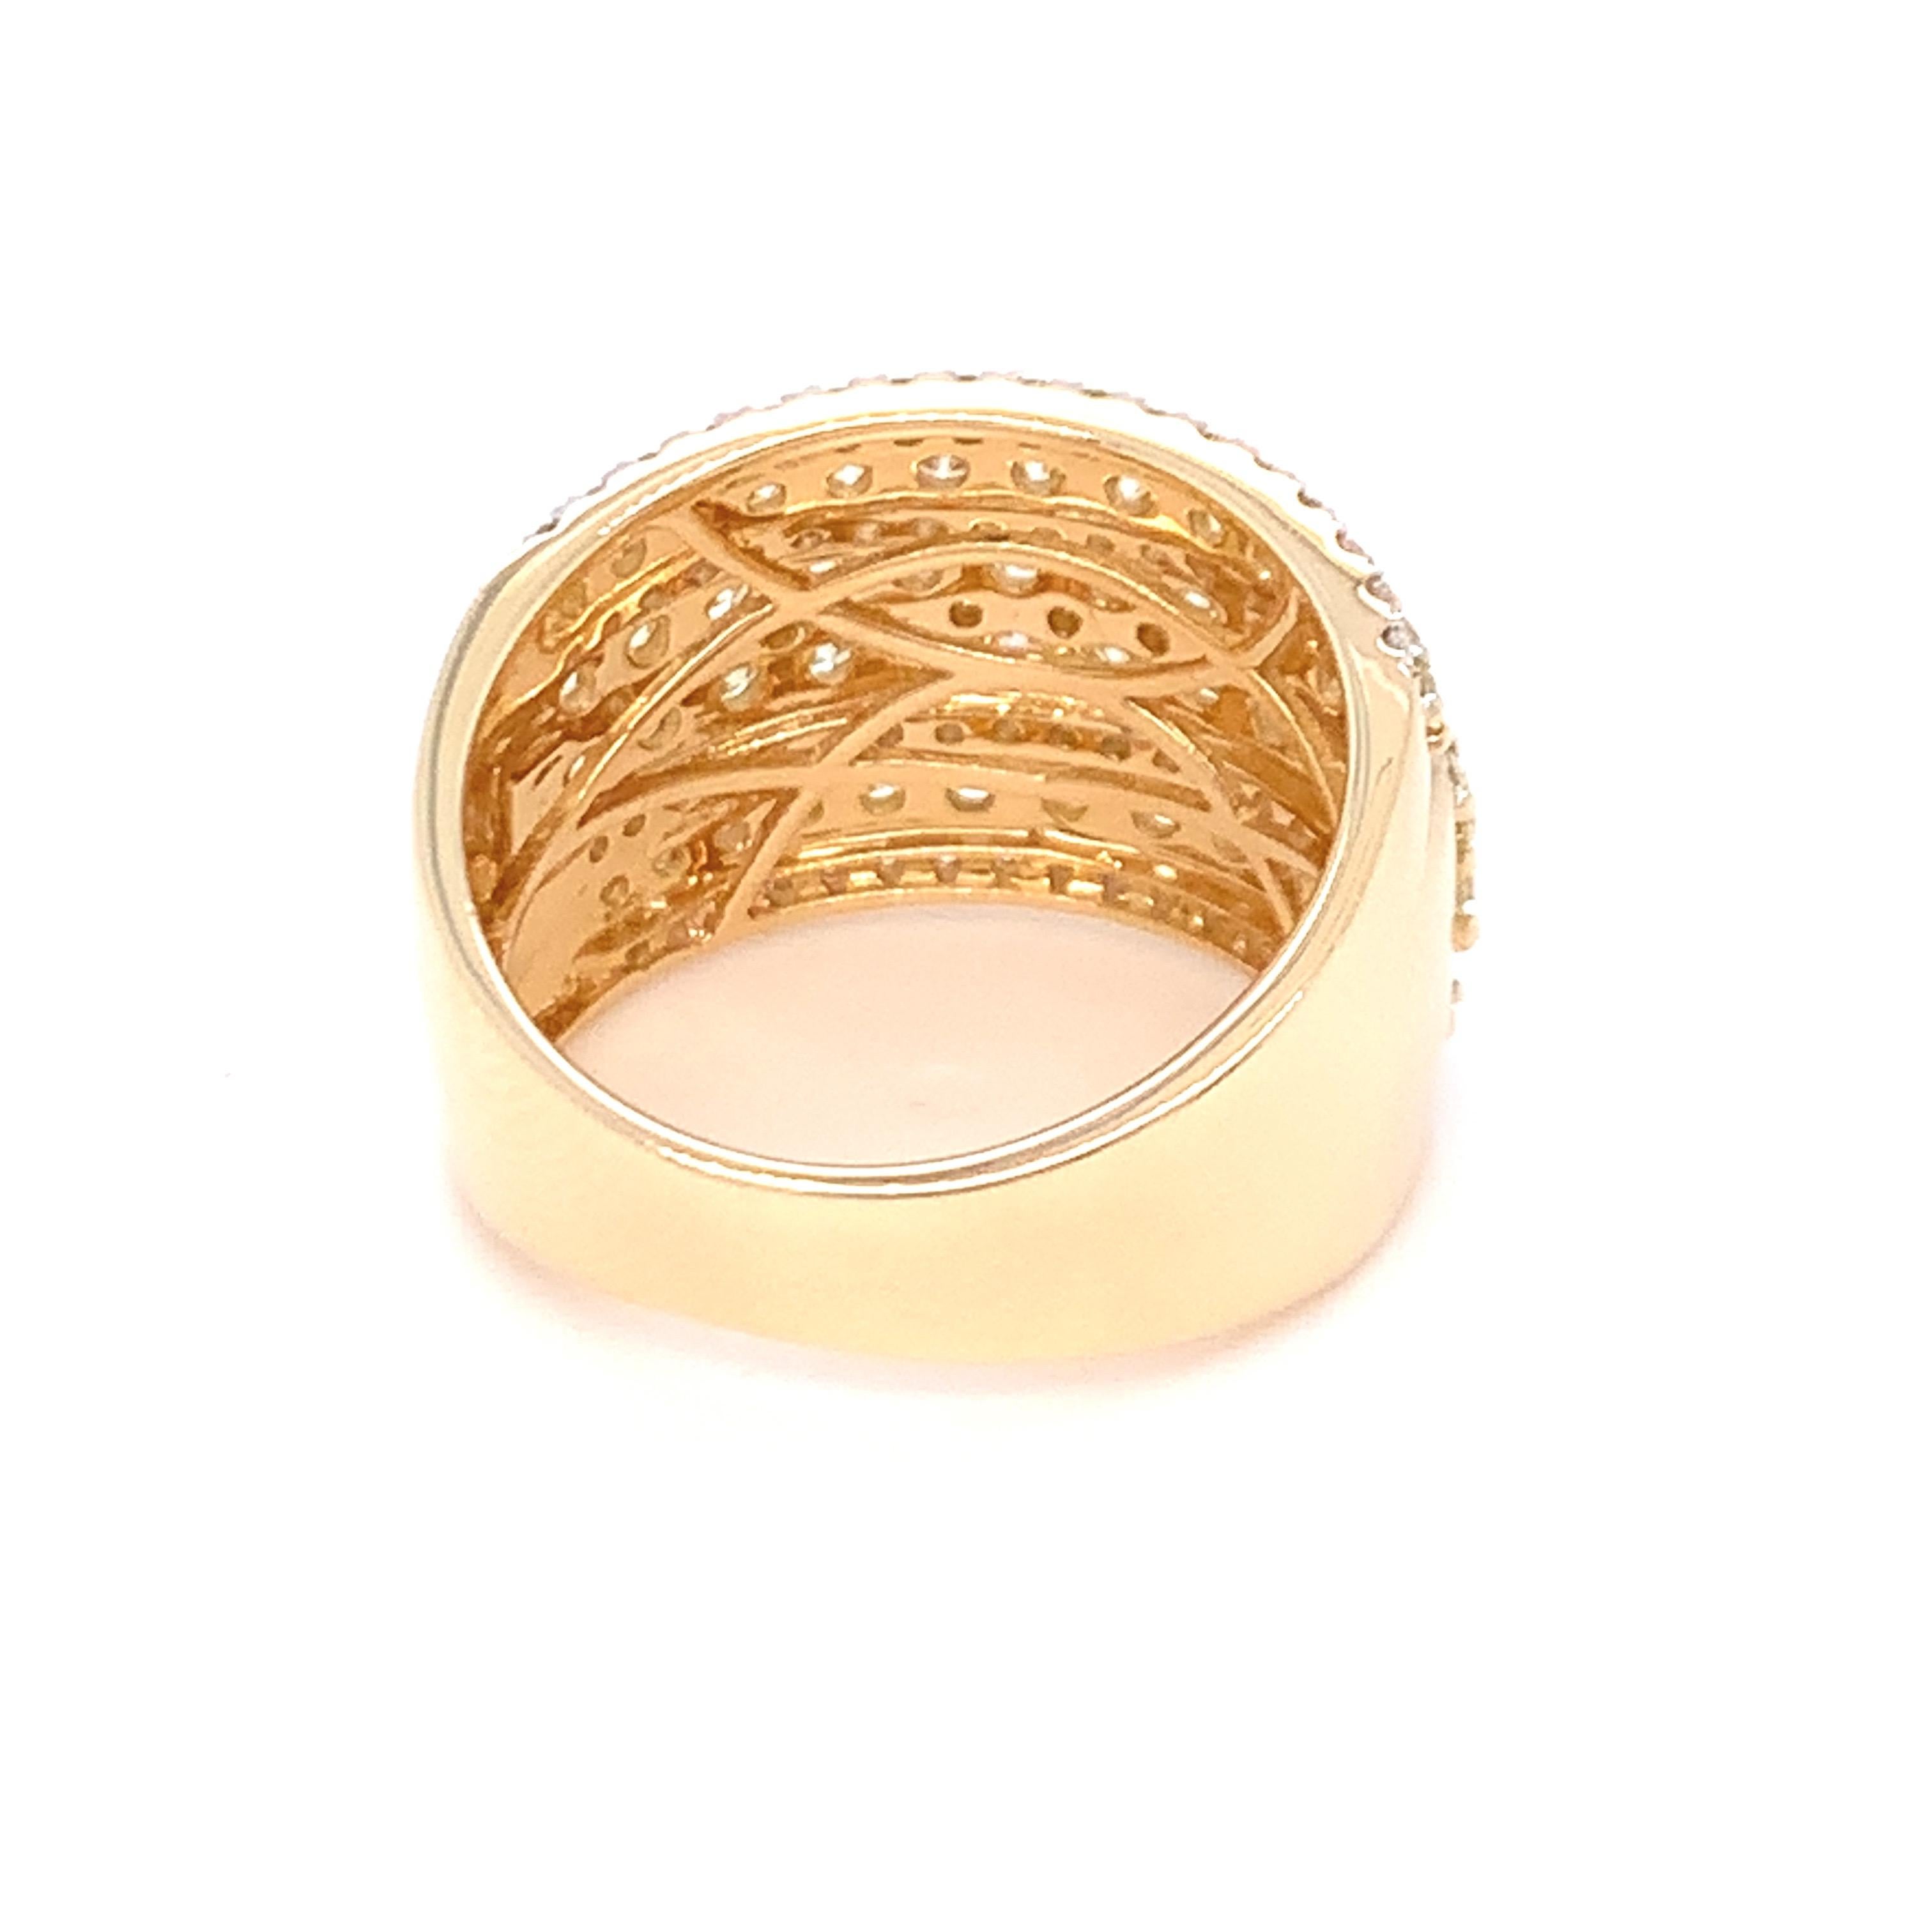 2.08 Carat Diamond Band Ring in 14k Yellow Gold For Sale 1